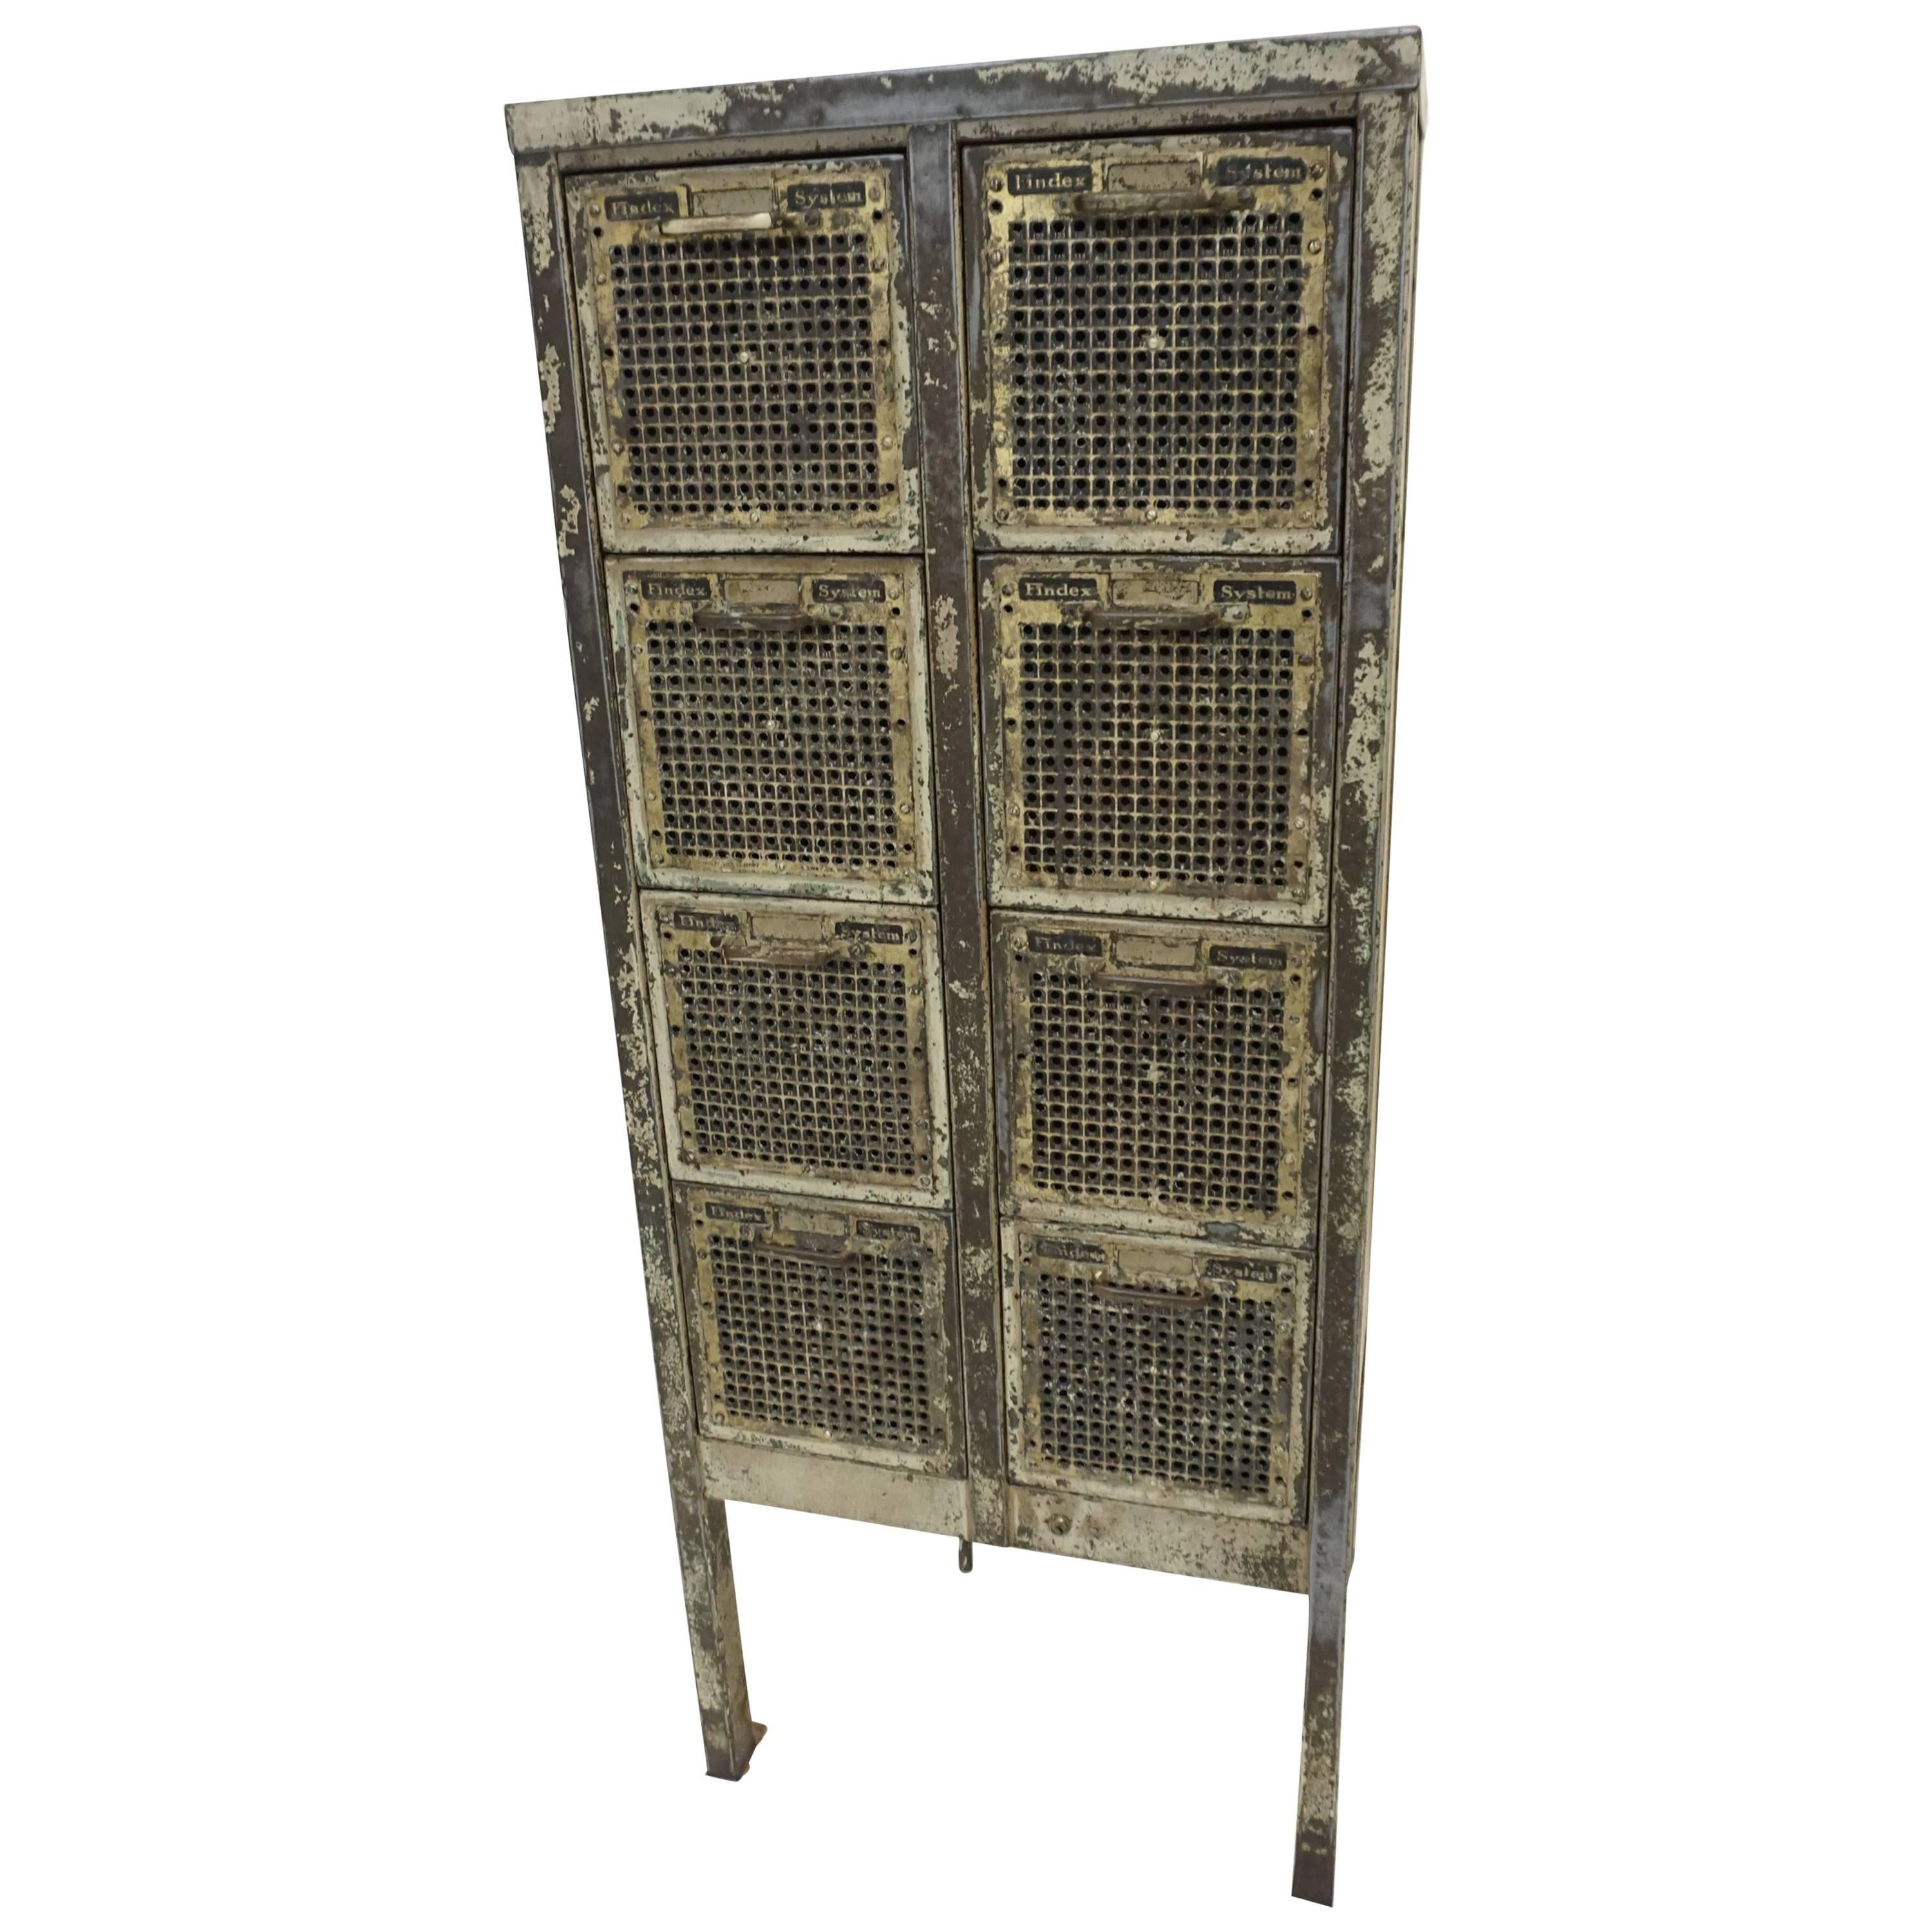 Fantastic 1940 Iron and Brass File Cabinet